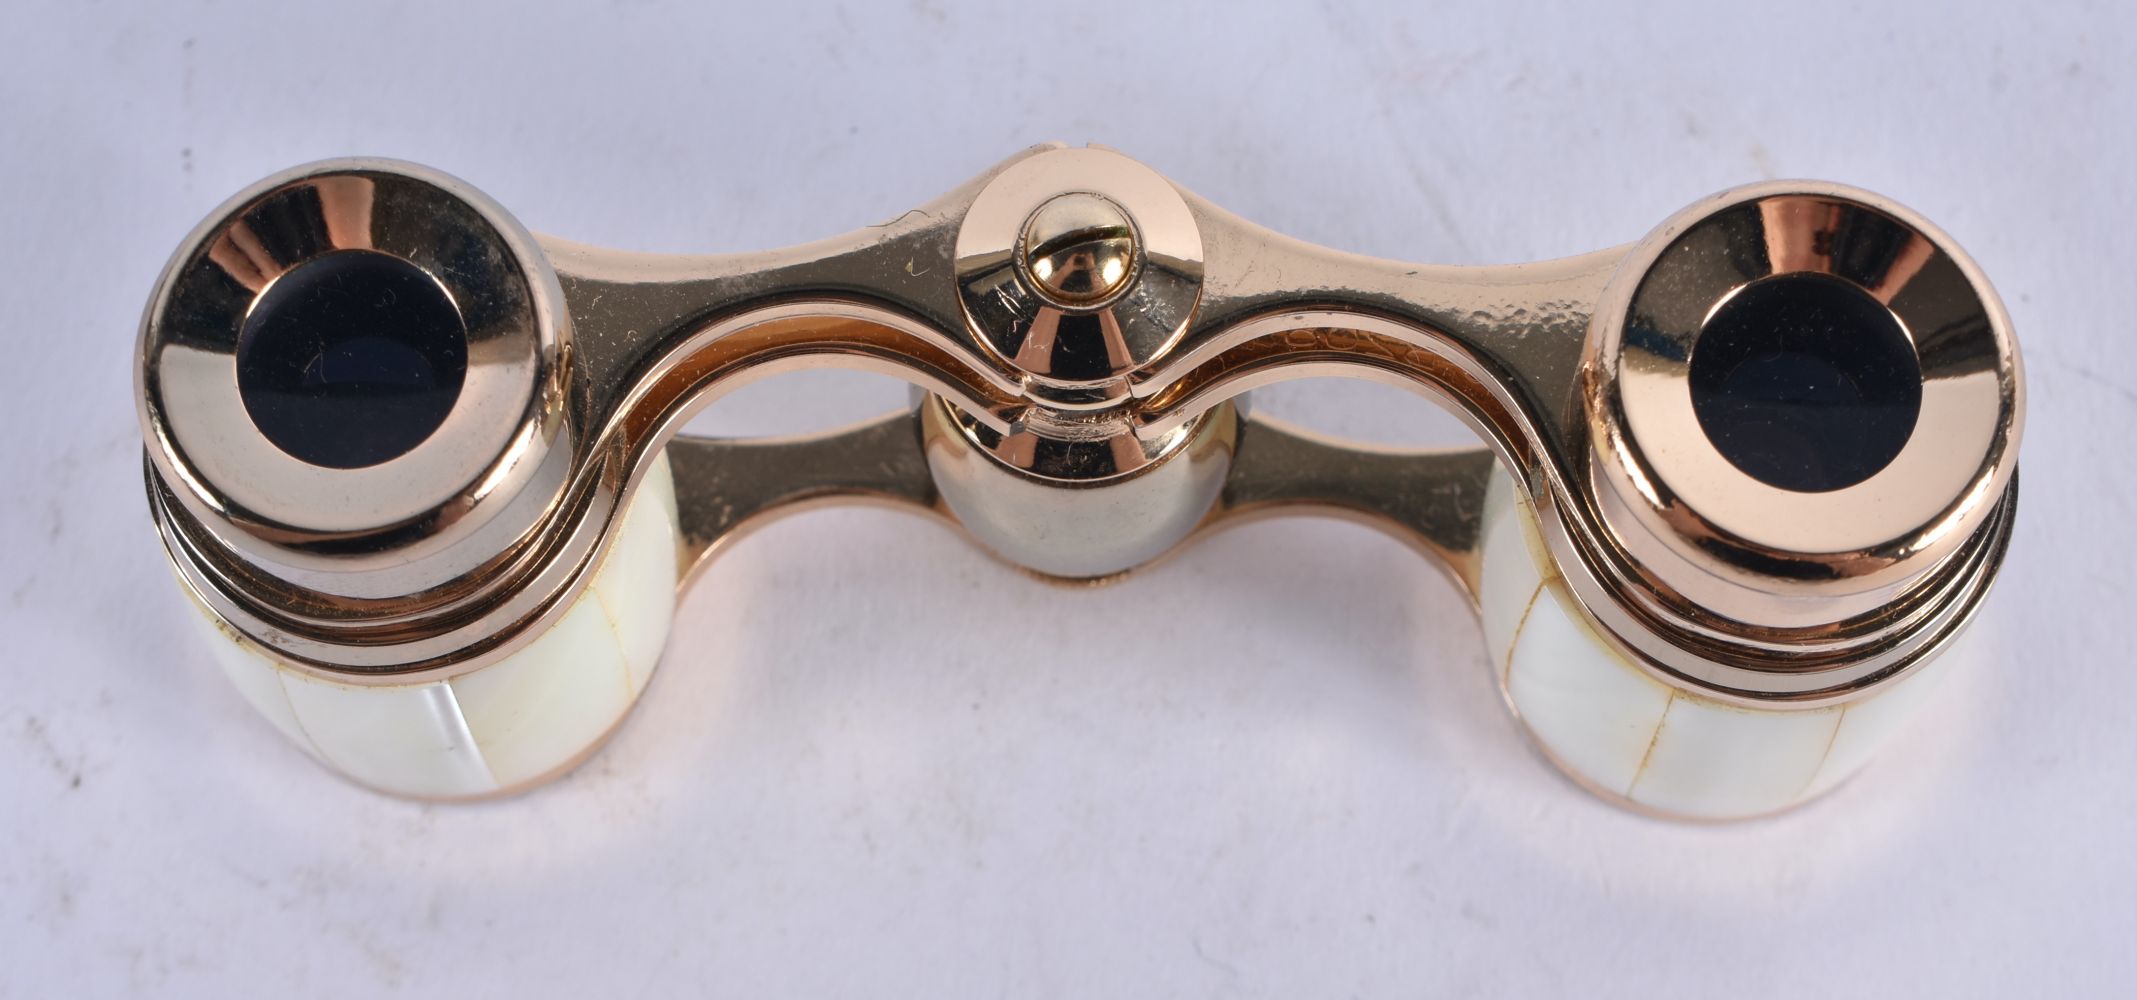 A PAIR OF MOTHER OF PEARL OPERA GLASSES. 9 cm x 6 cm. - Image 3 of 4